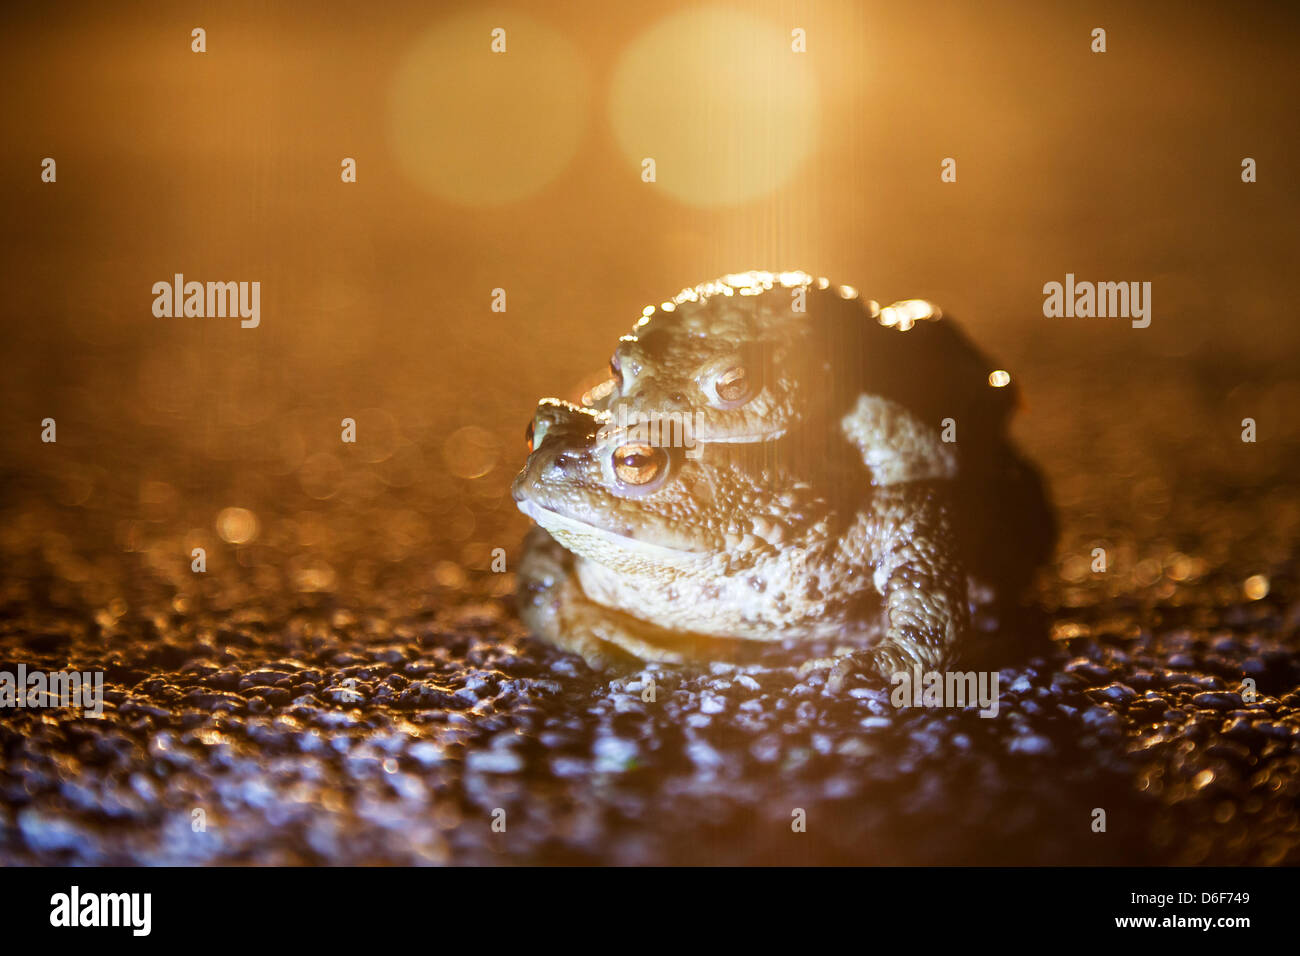 Germany/Saxony/Bluno, toad migratiion, two toas (european toad - bufo bufo) sit on a street at night, 16 April 2013 Stock Photo